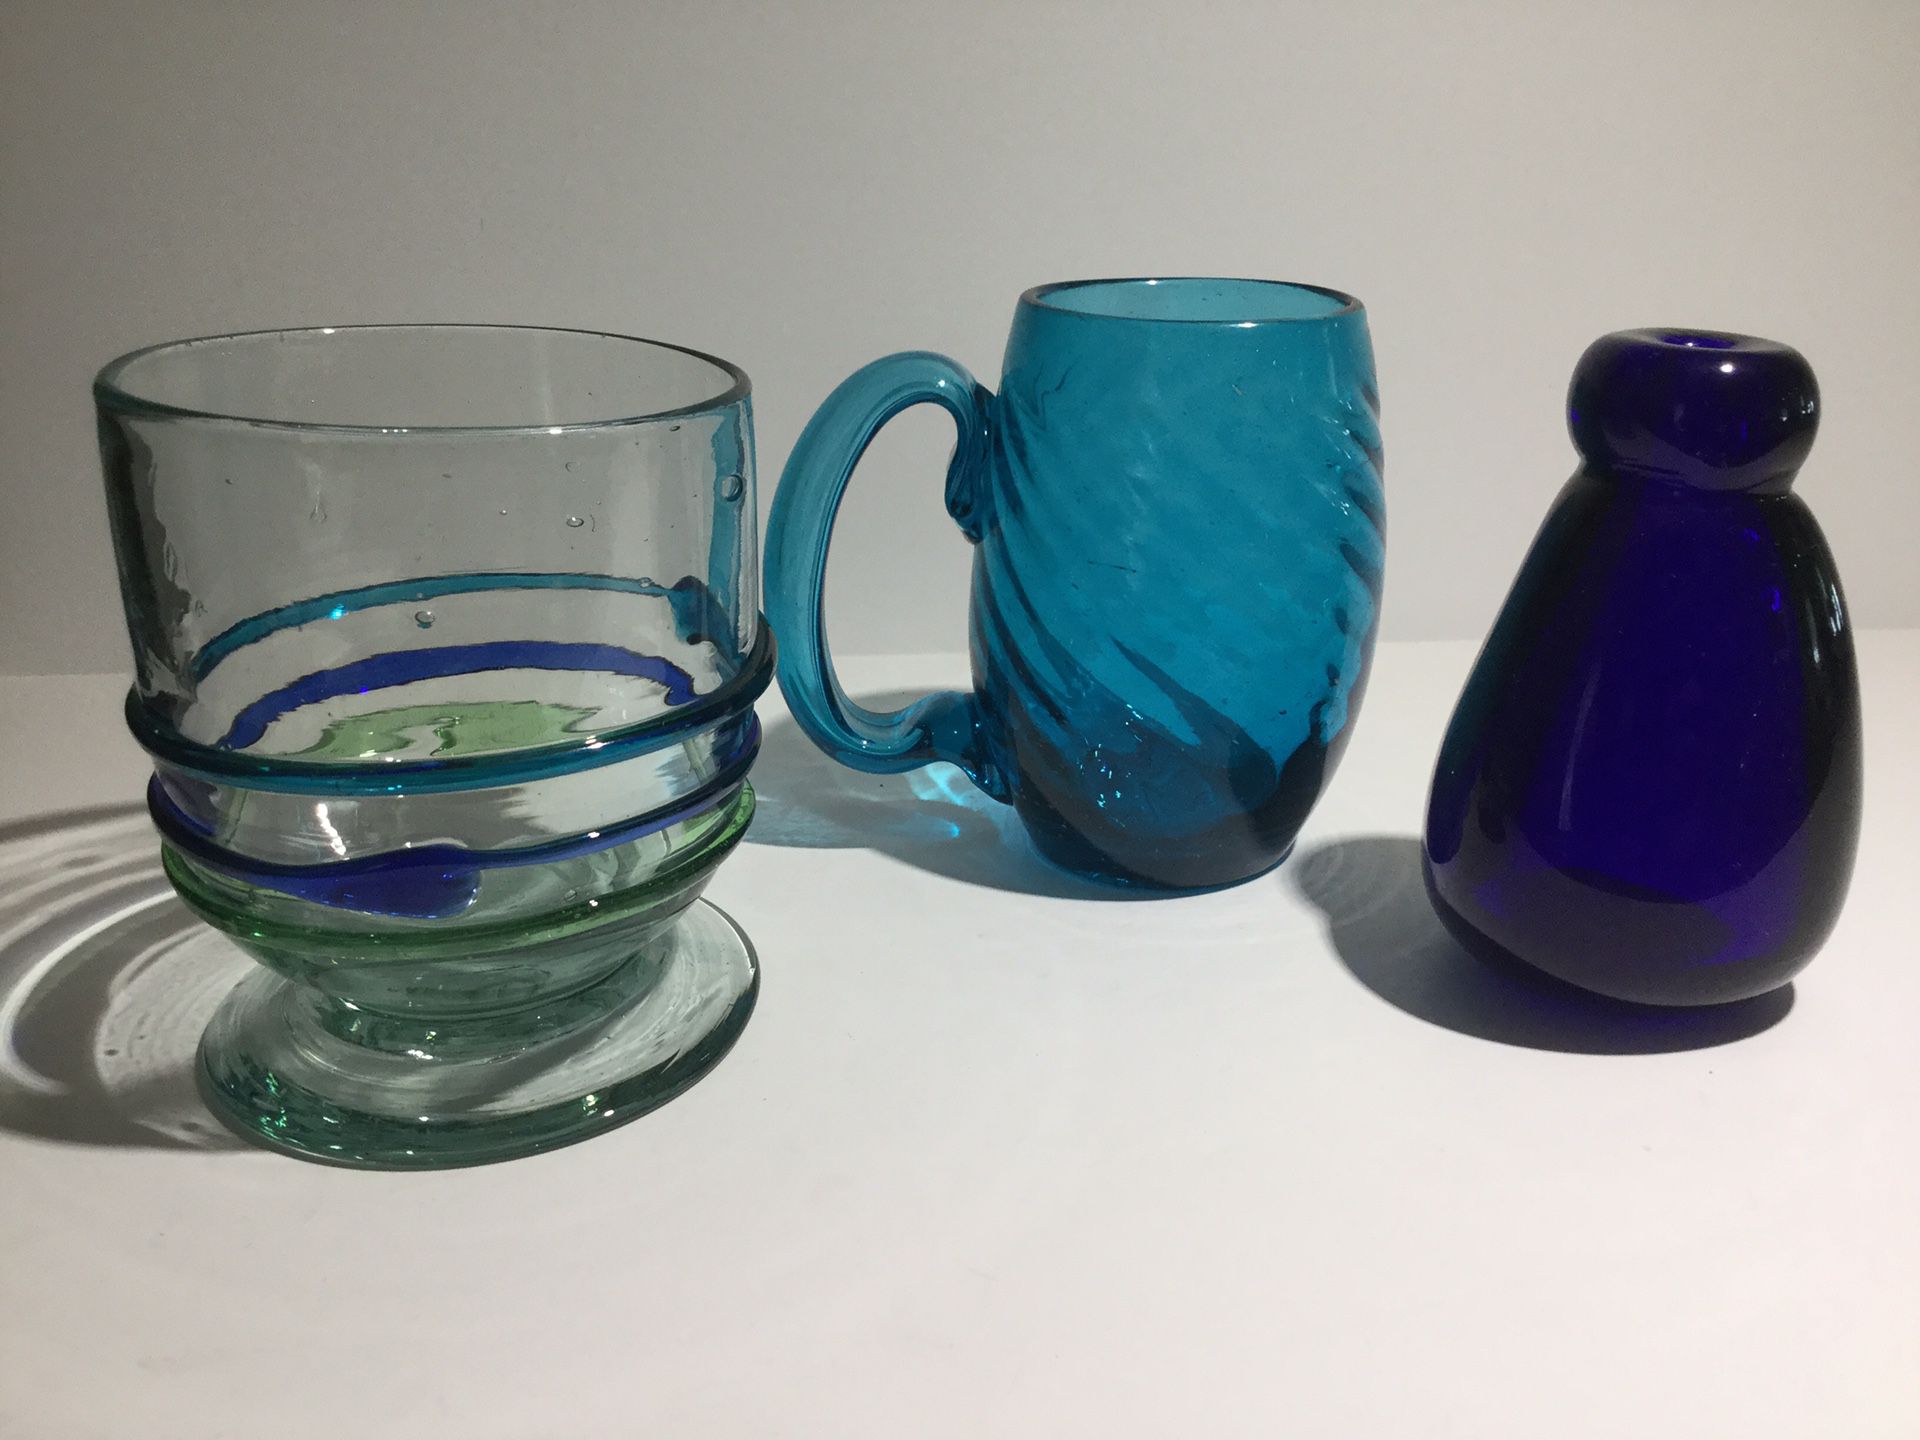 COLLECTION OF 3 VINTAGE COLORED HAND BLOWN GLASS DECOR